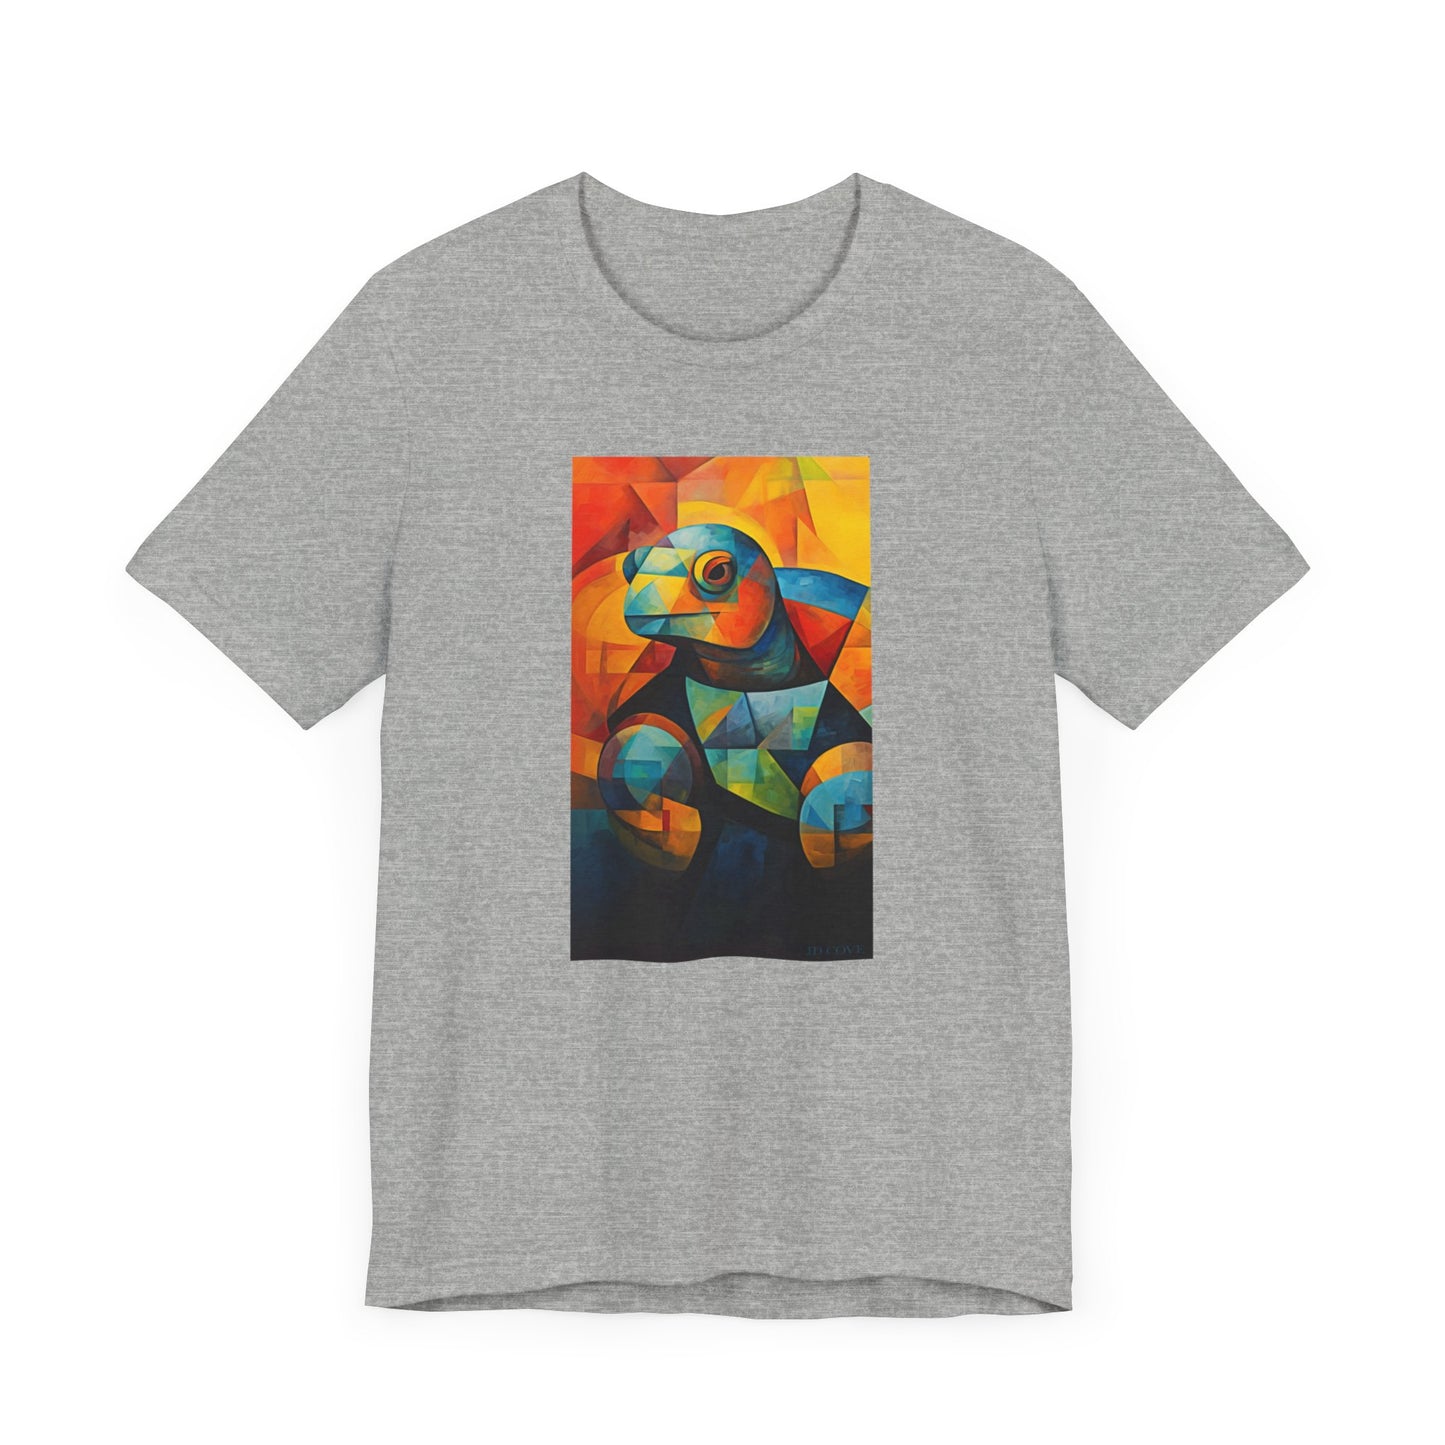 Colorful Cubist Turtle Graphic Tee - Unisex Eco-Friendly Cotton Shirt by JD Cove